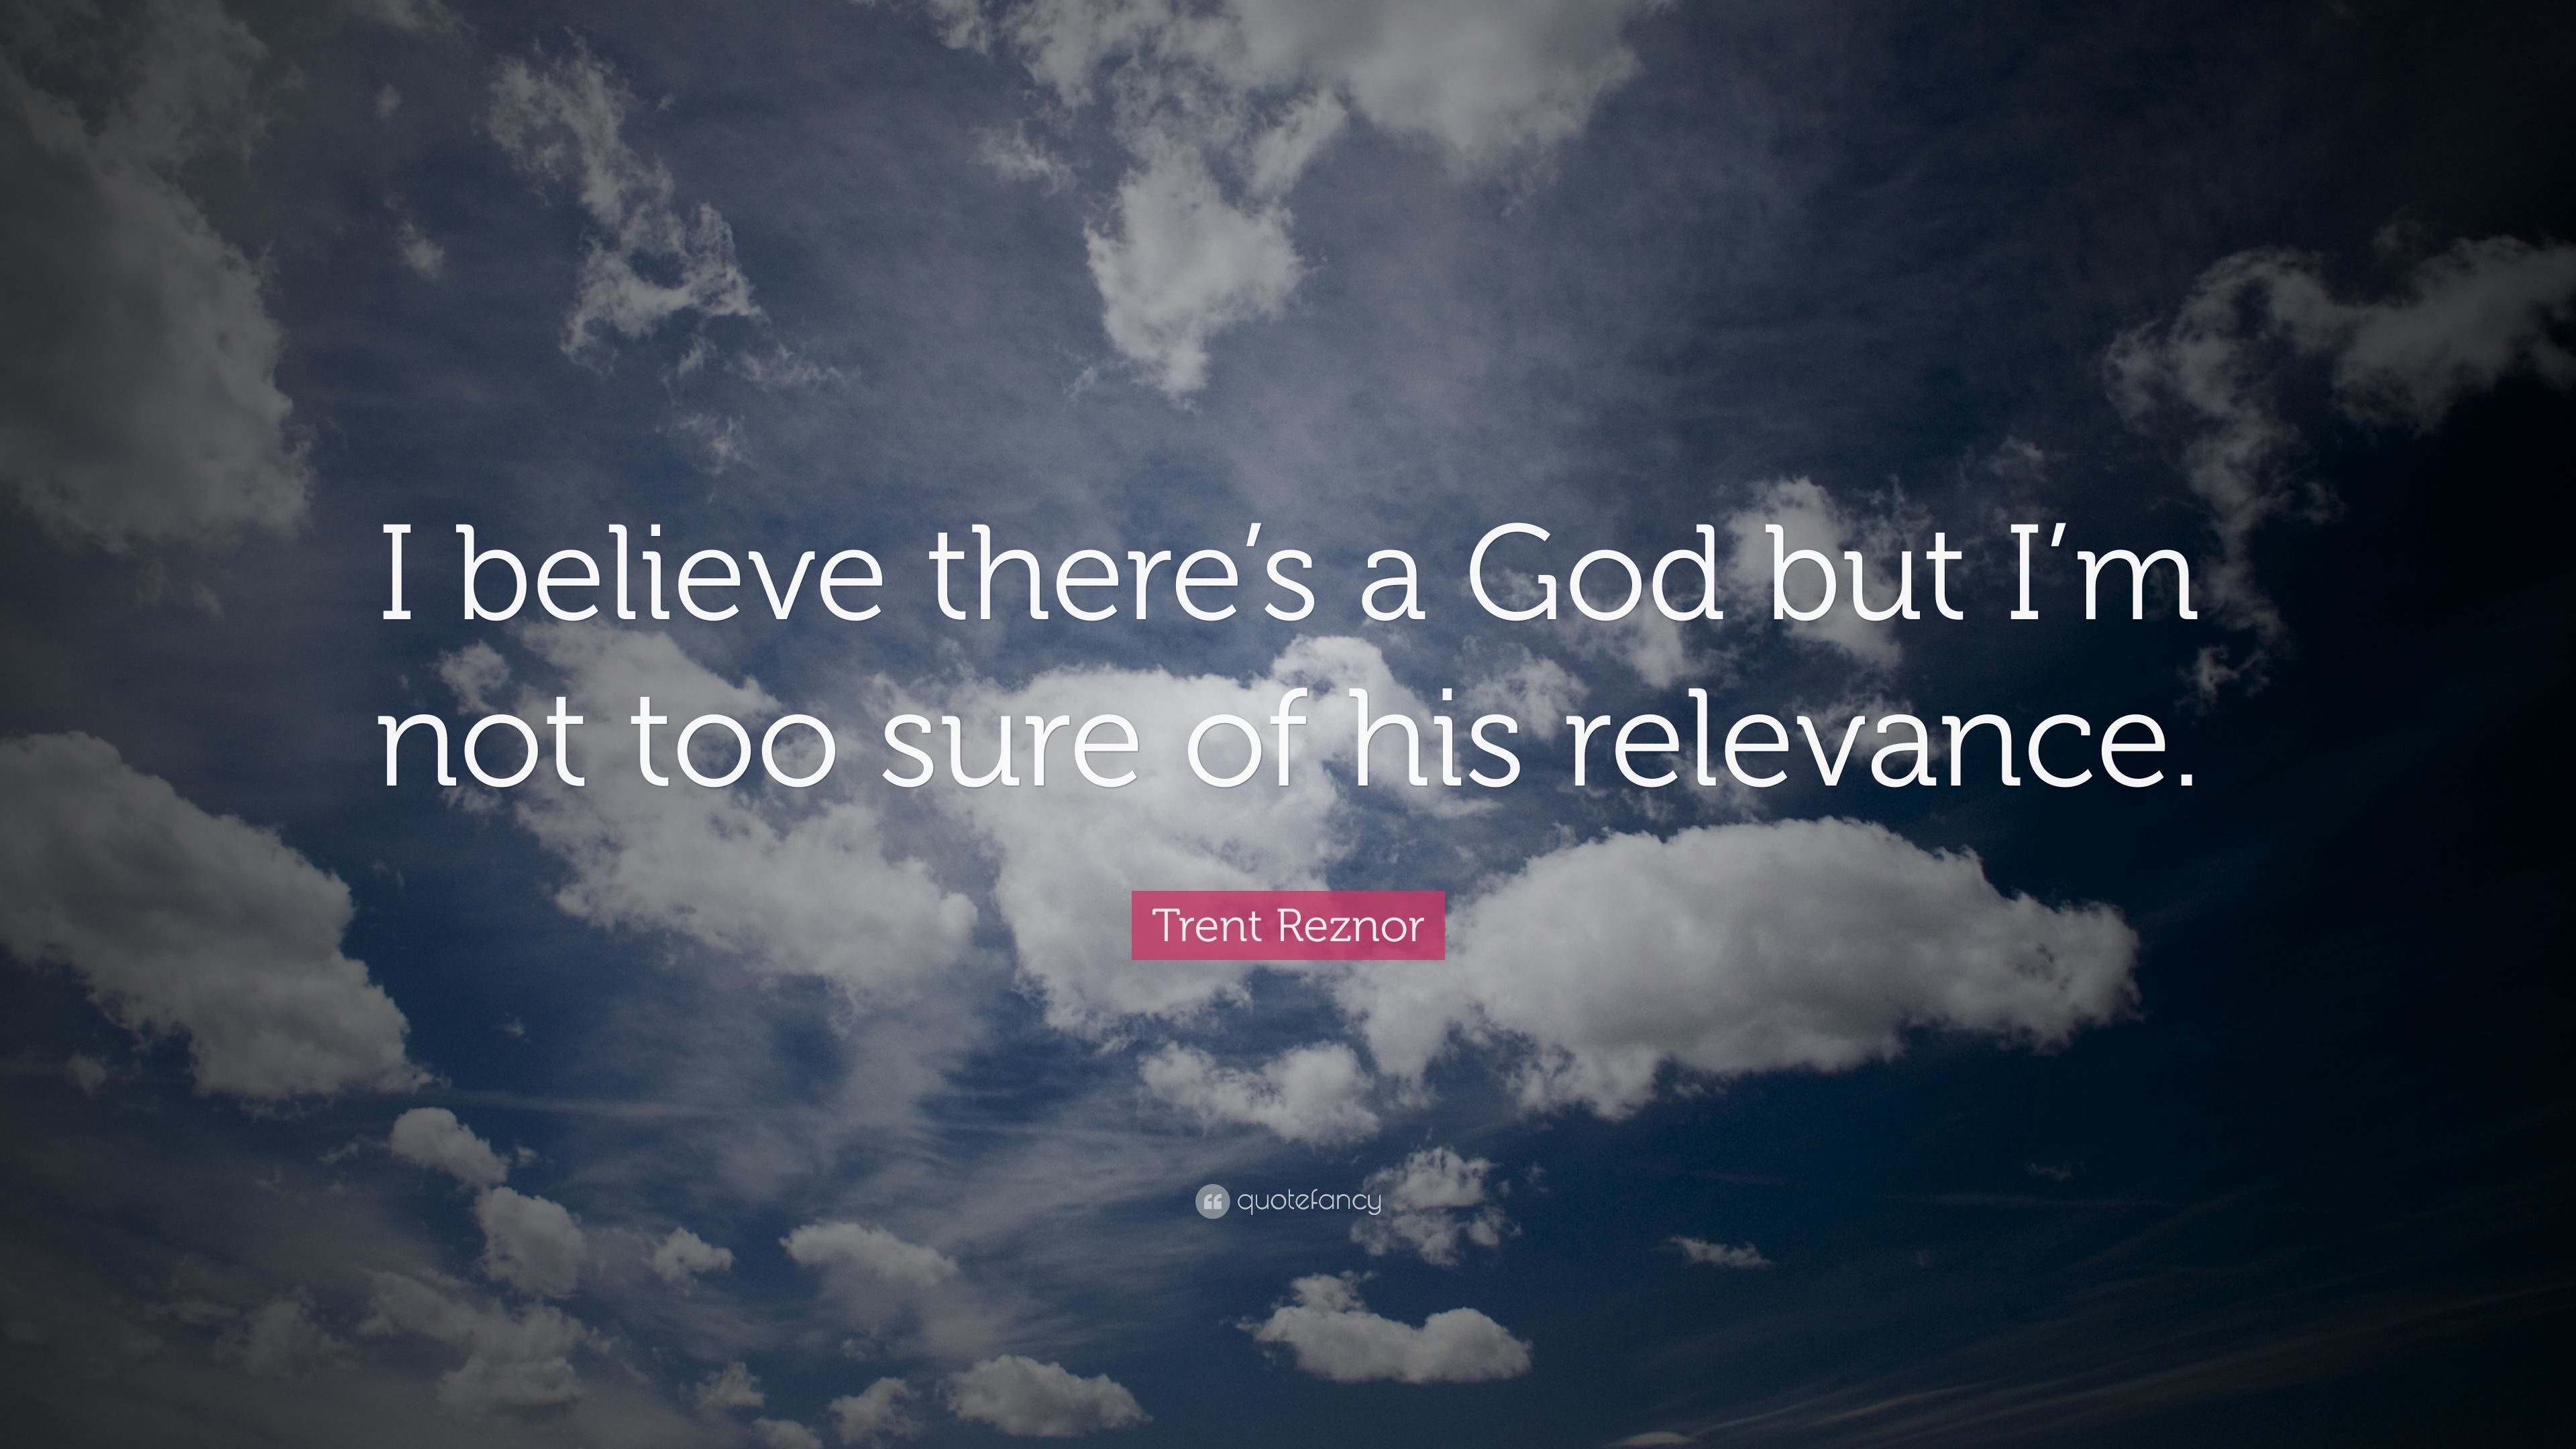 3840x2160 Trent Reznor Quote: “I believe there's a God but I'm not too